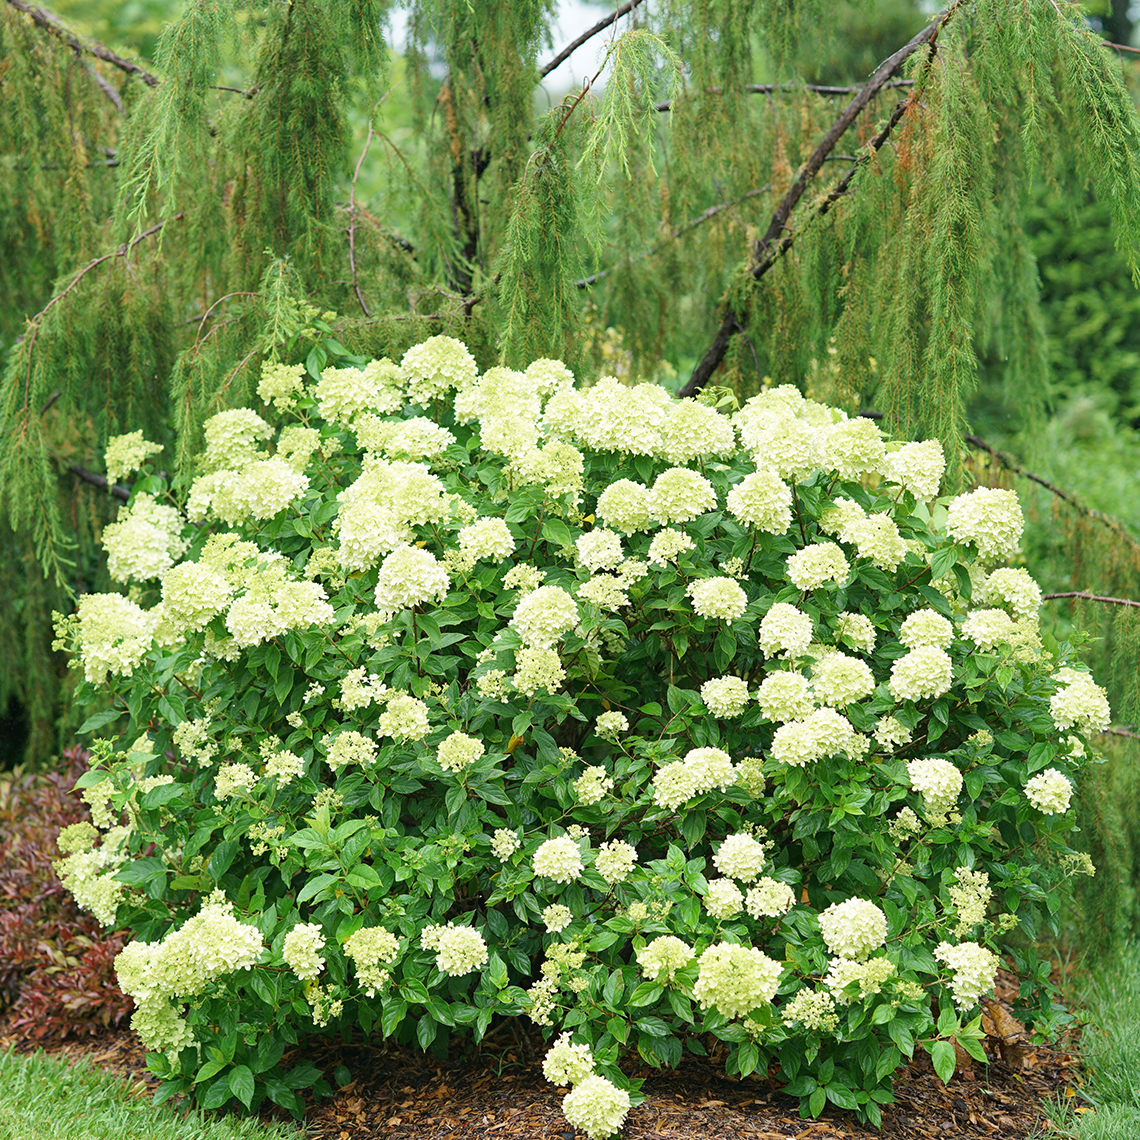 A mature specimen of Little Lime panicle hydrangea blooming in the landscape showing its dwarf habit and rounded form